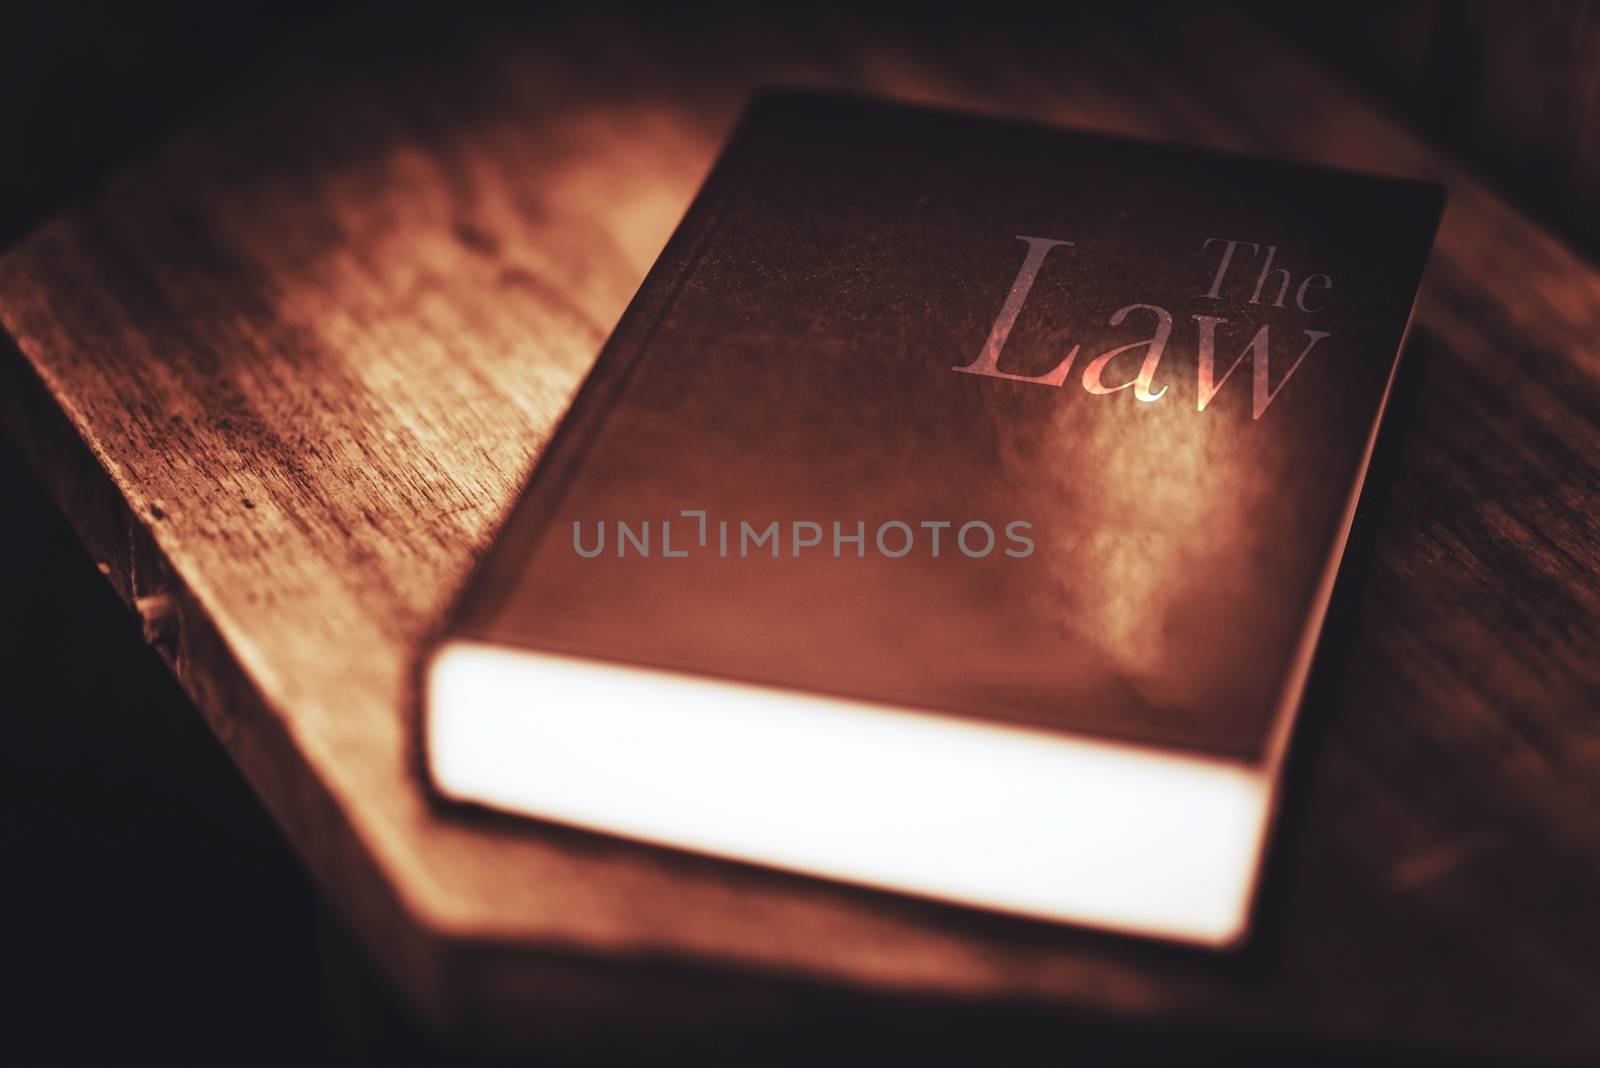 The Book of Law. Leaning the Law Concept Photo.